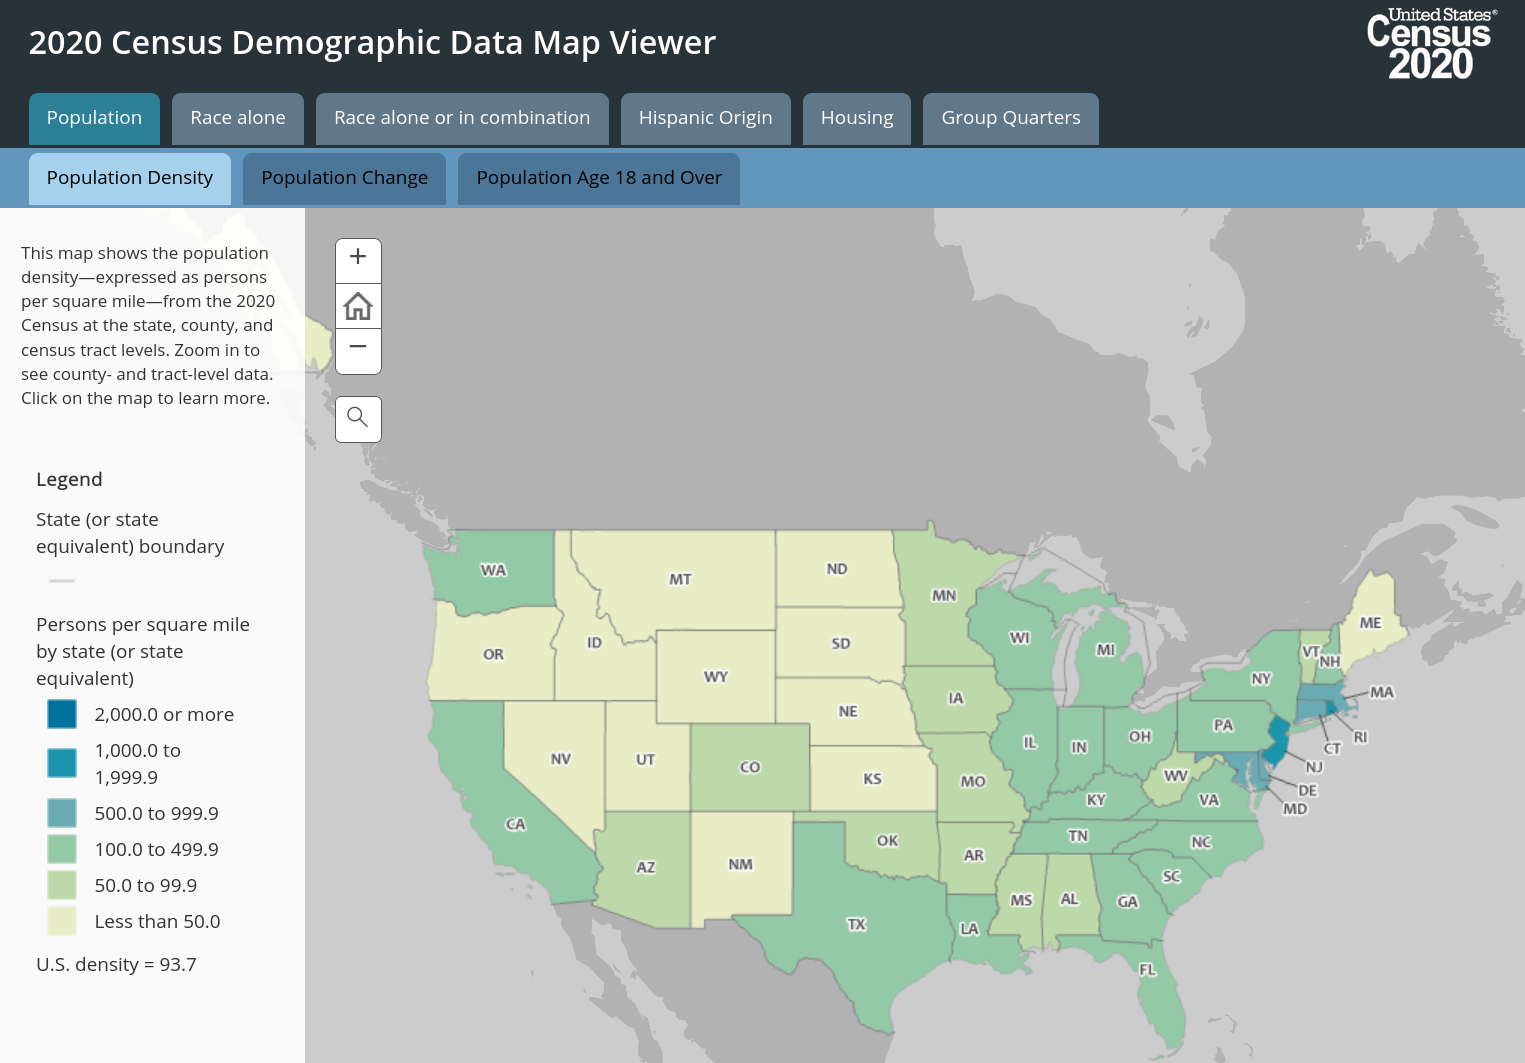 A screenshot from the 2020 Census Demographic Data Map Viewer